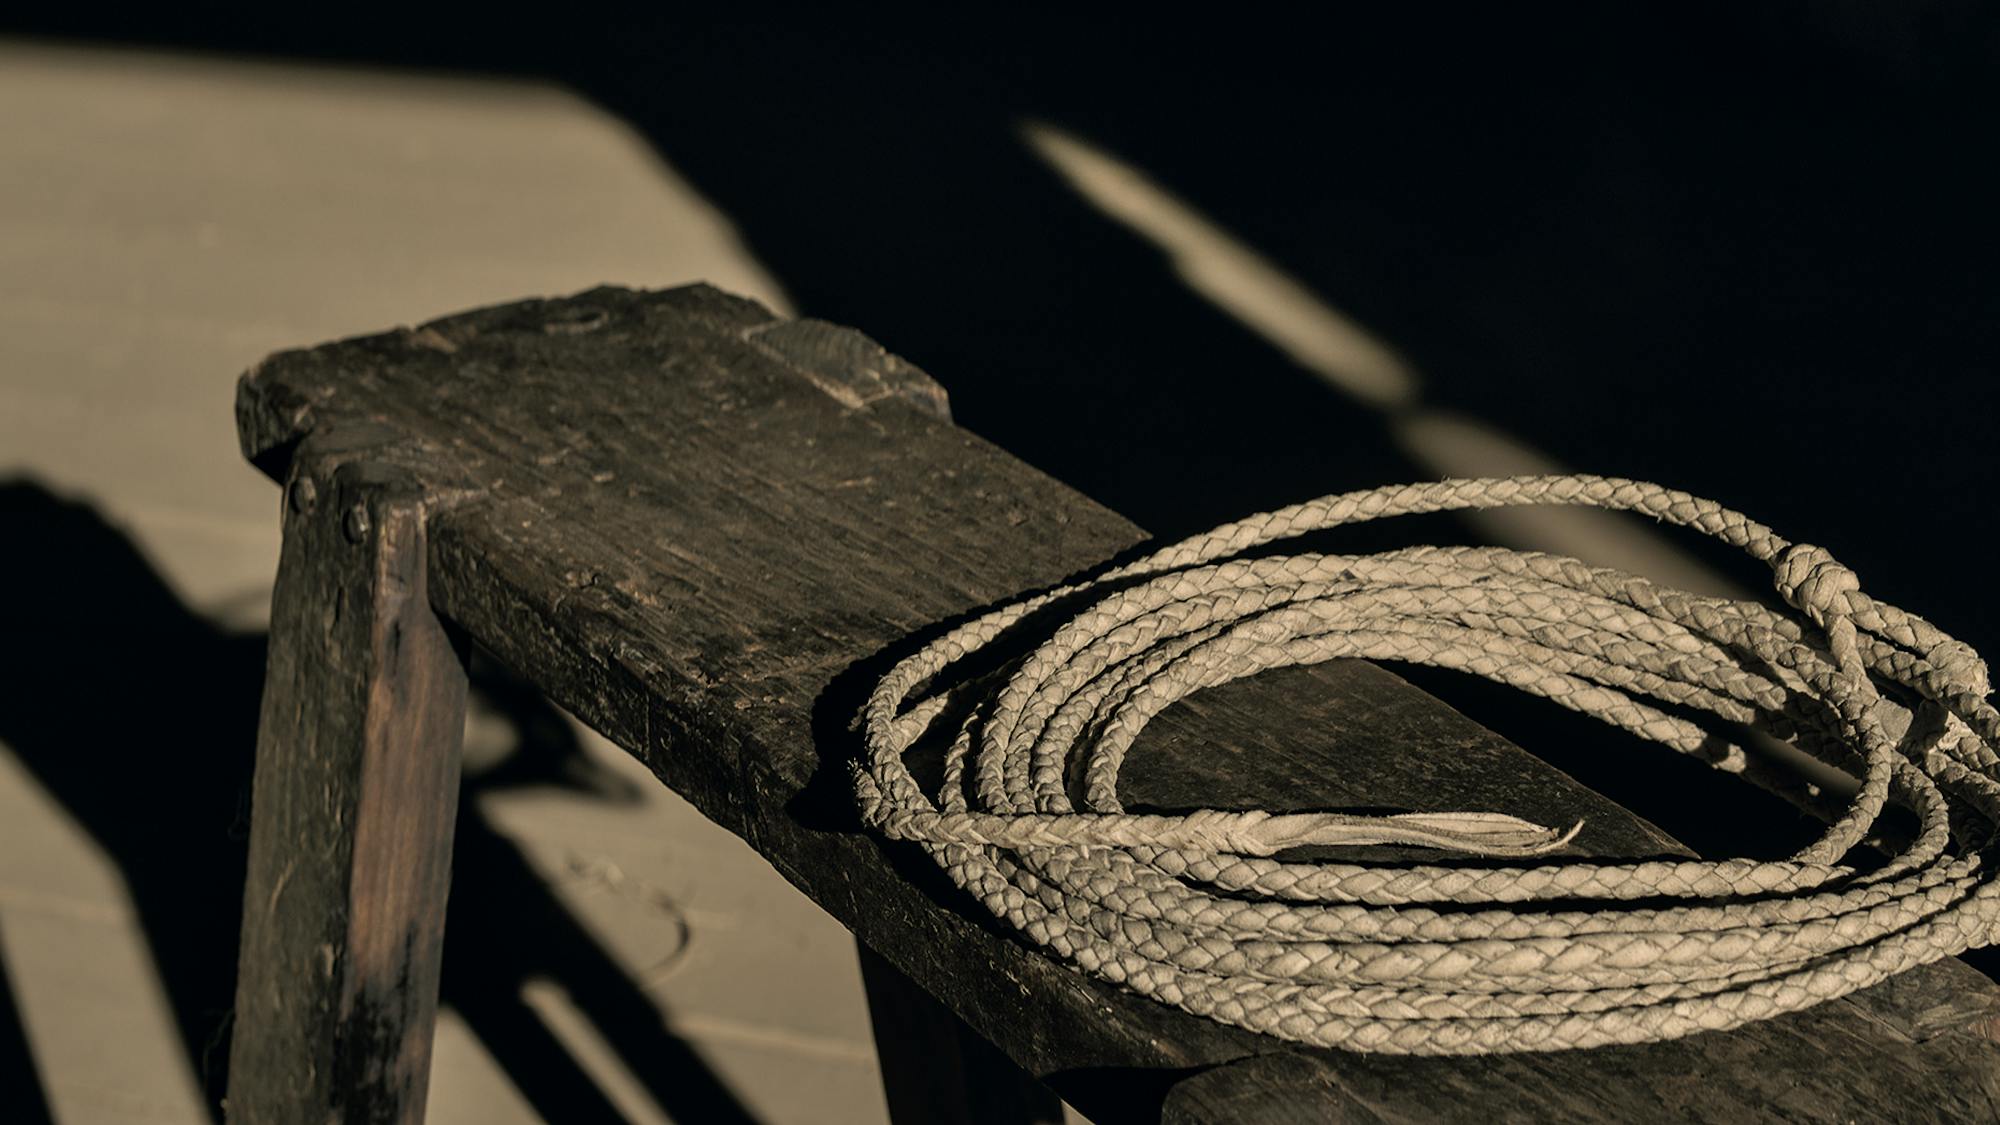 A lasso on a wooden bench.